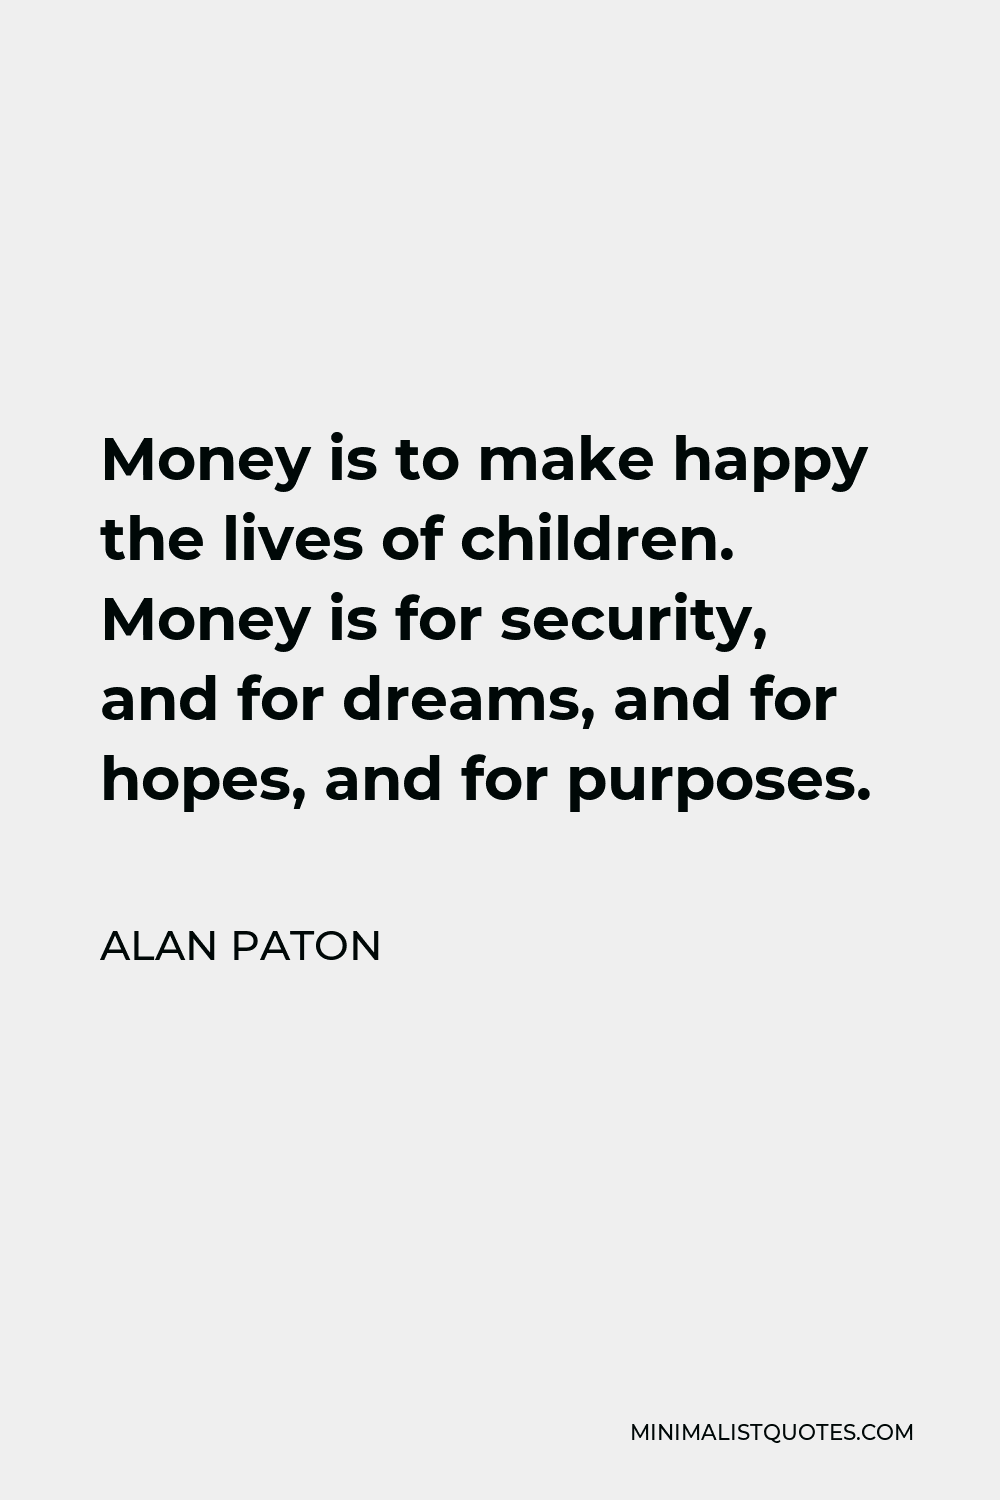 Alan Paton Quote - Money is to make happy the lives of children. Money is for security, and for dreams, and for hopes, and for purposes.